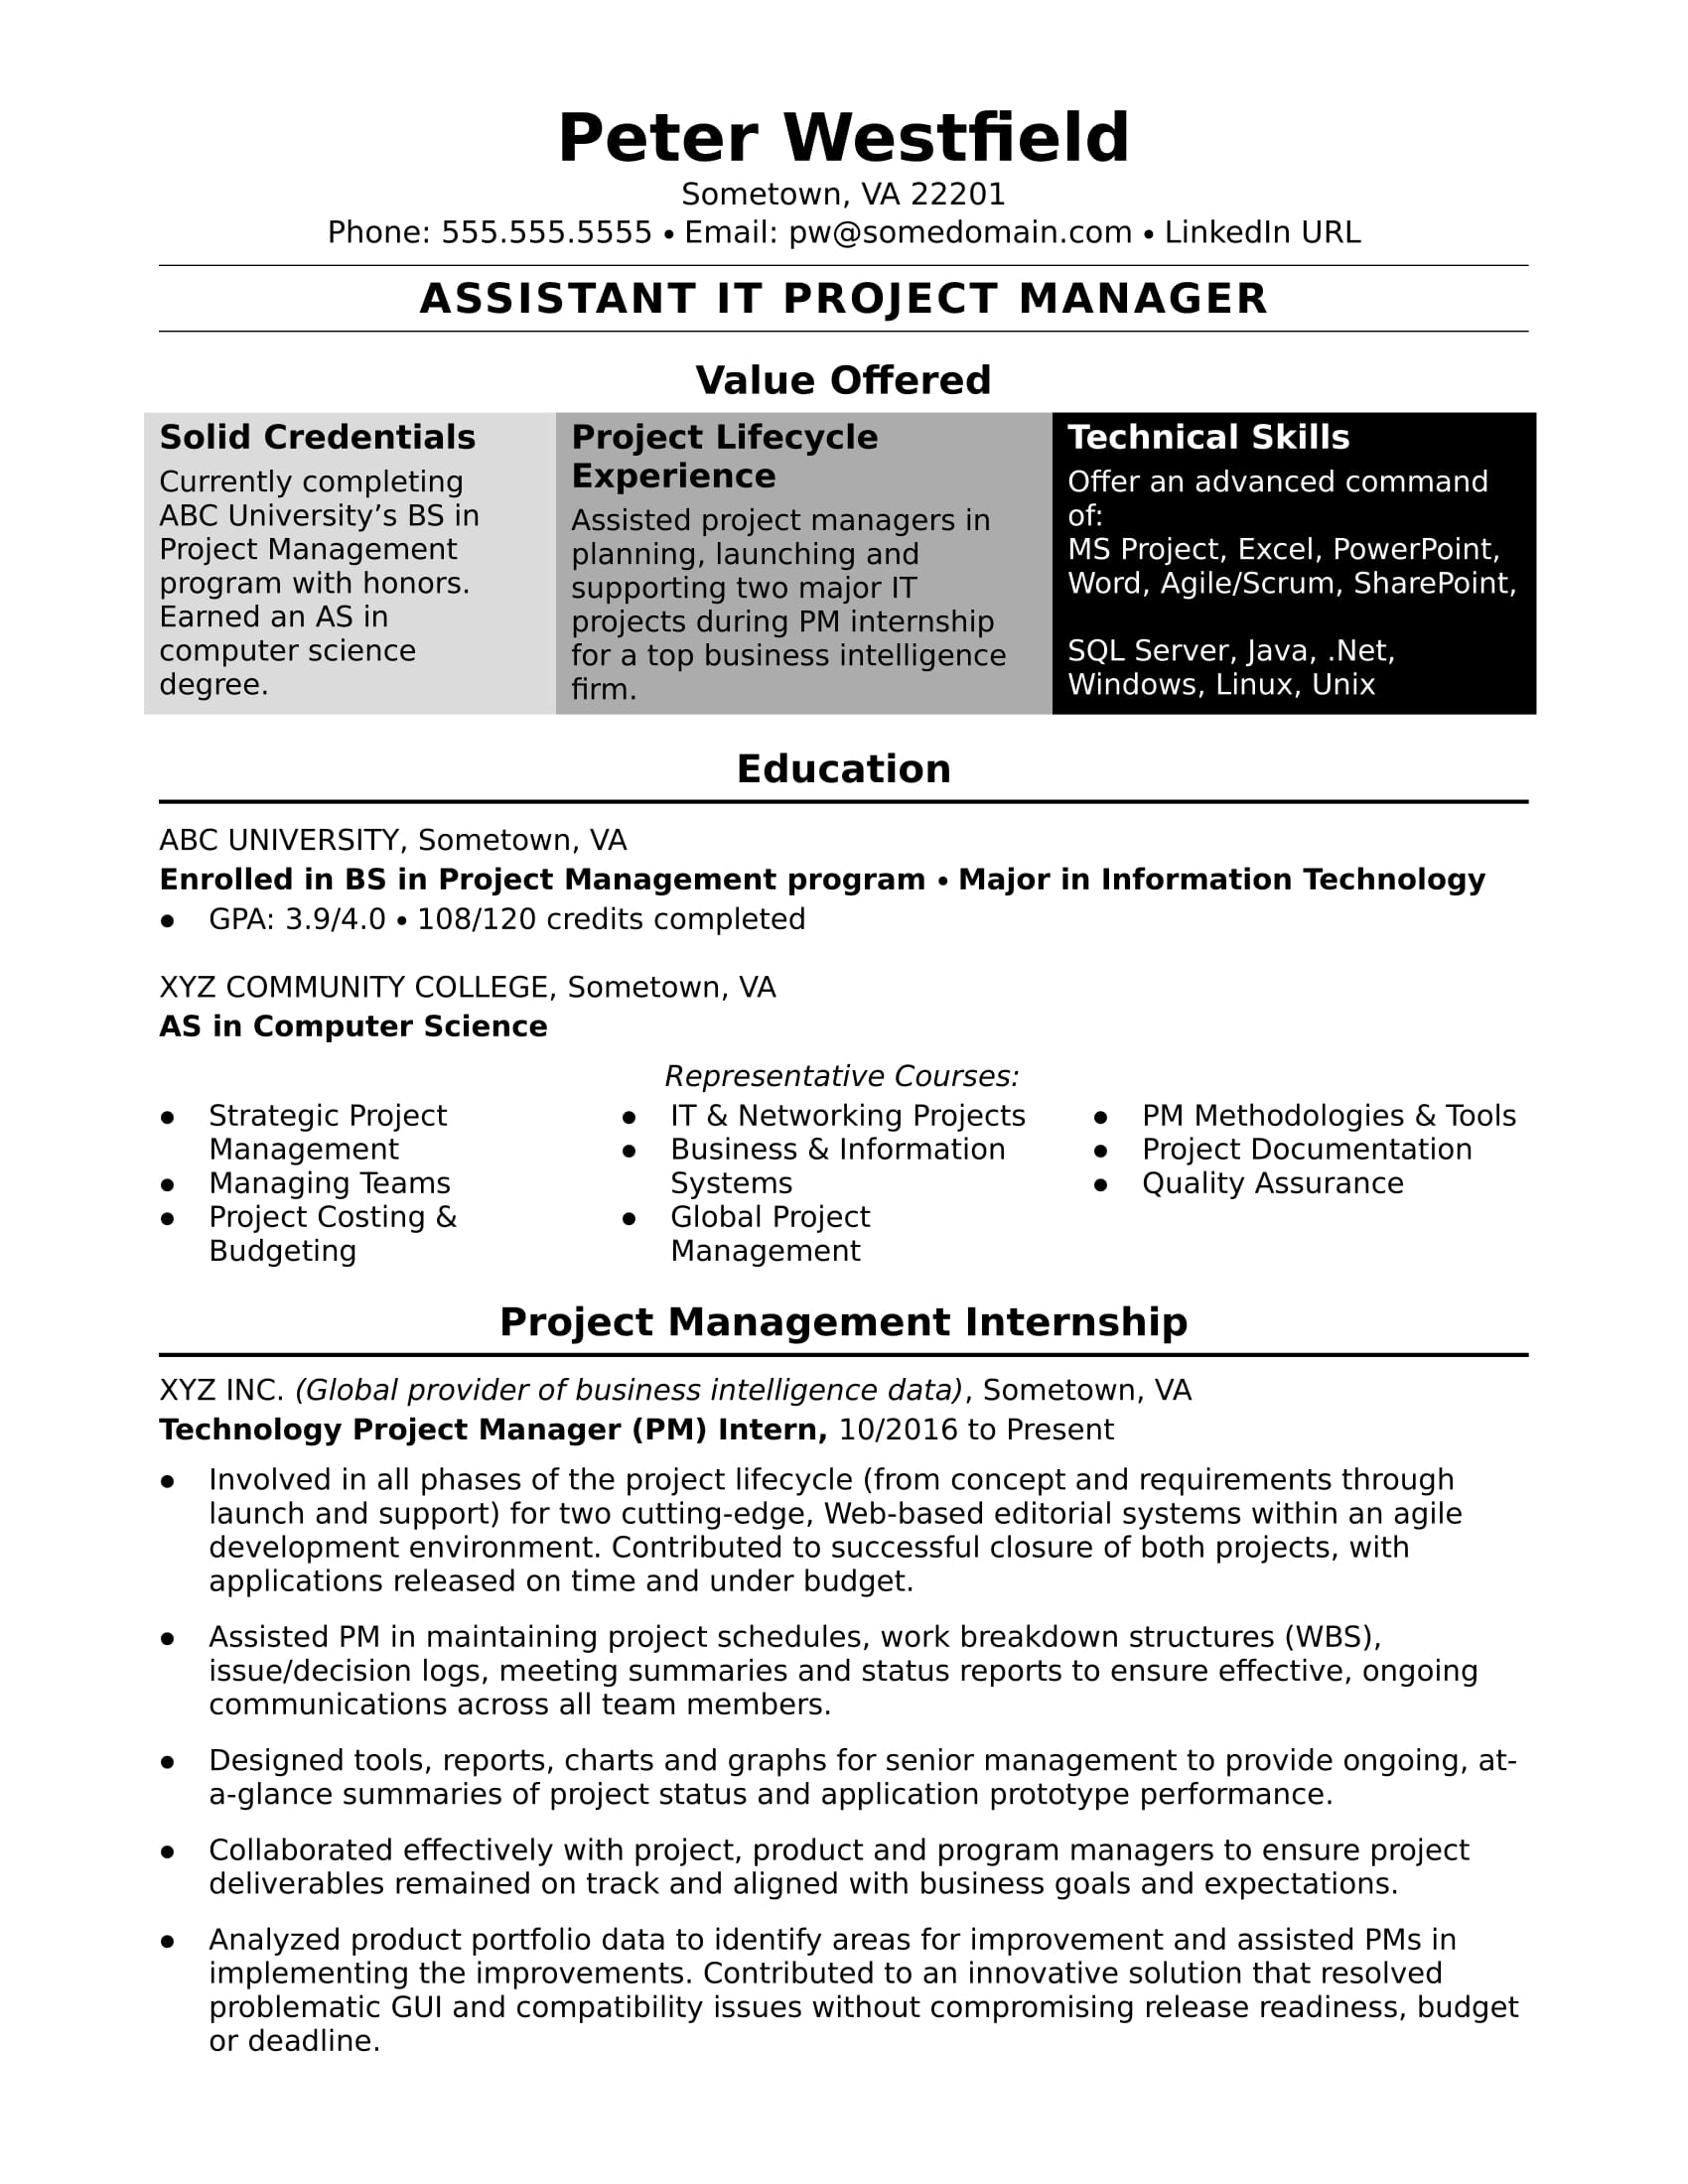 Sample Resume For An Assistant It Project Manager Monster Com